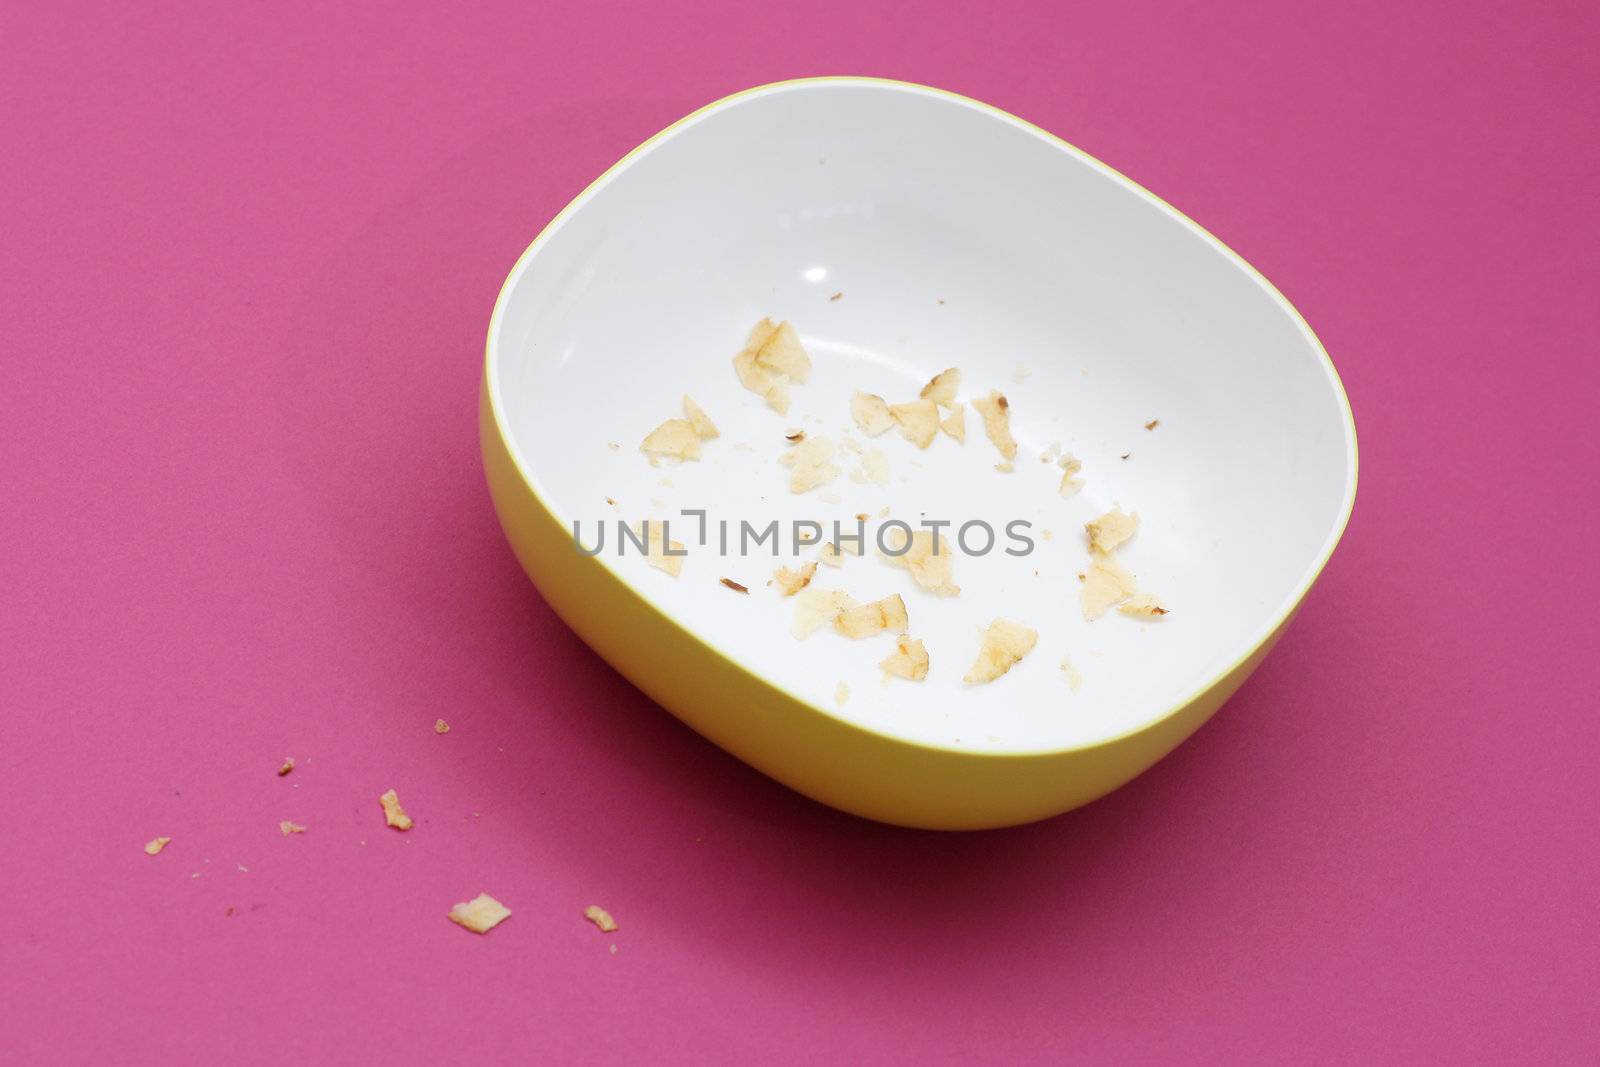 No potato chips left in the bowl